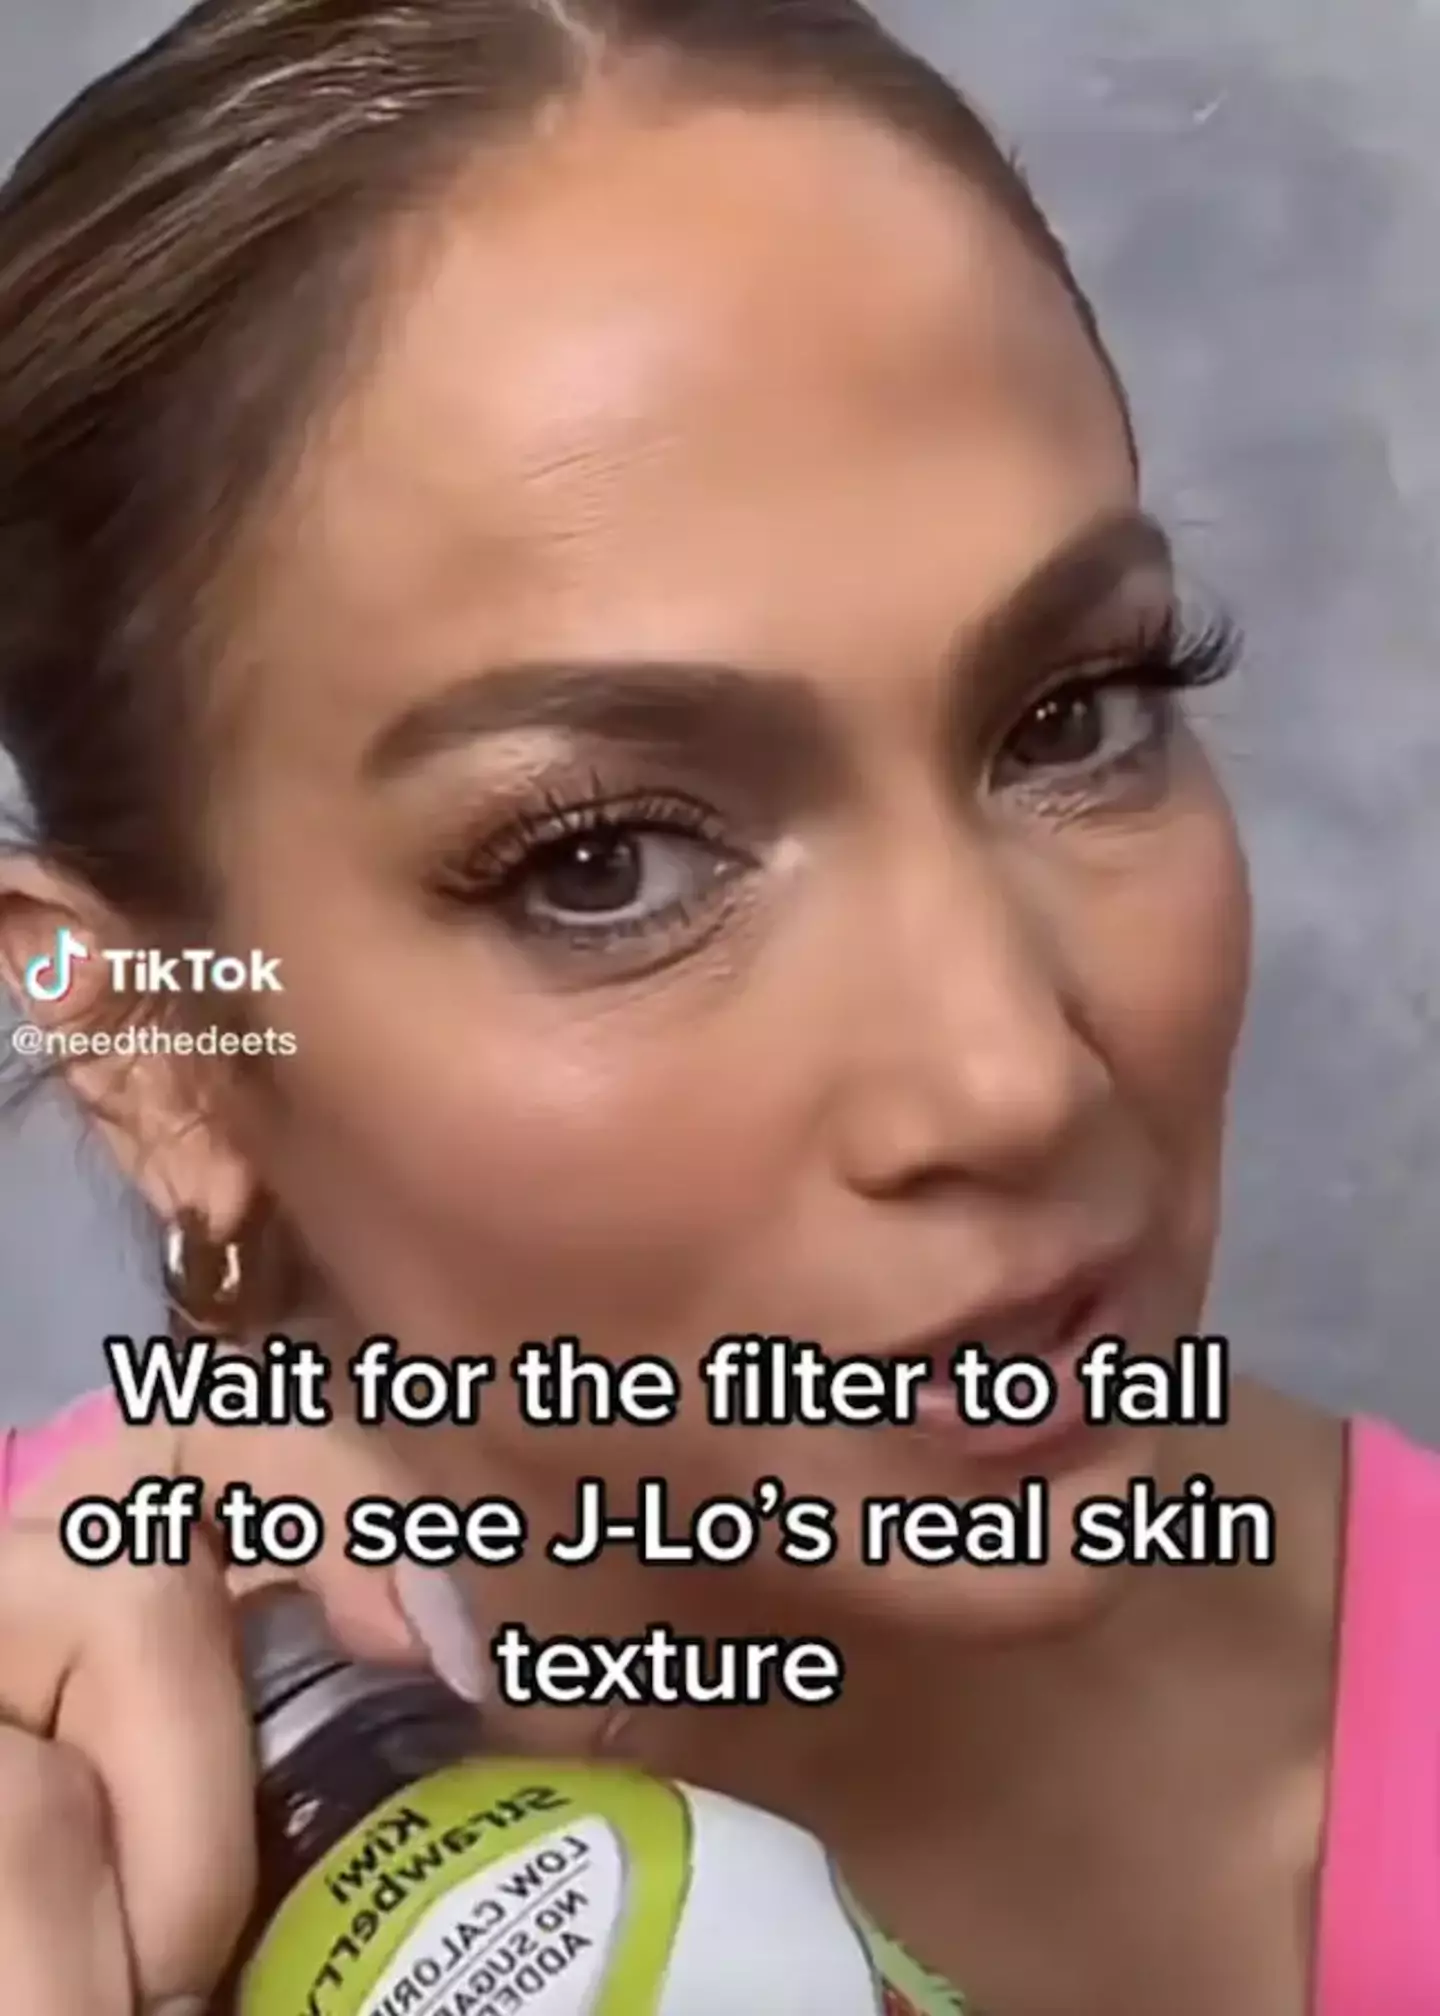 Some fans believe J.Lo used a filter.